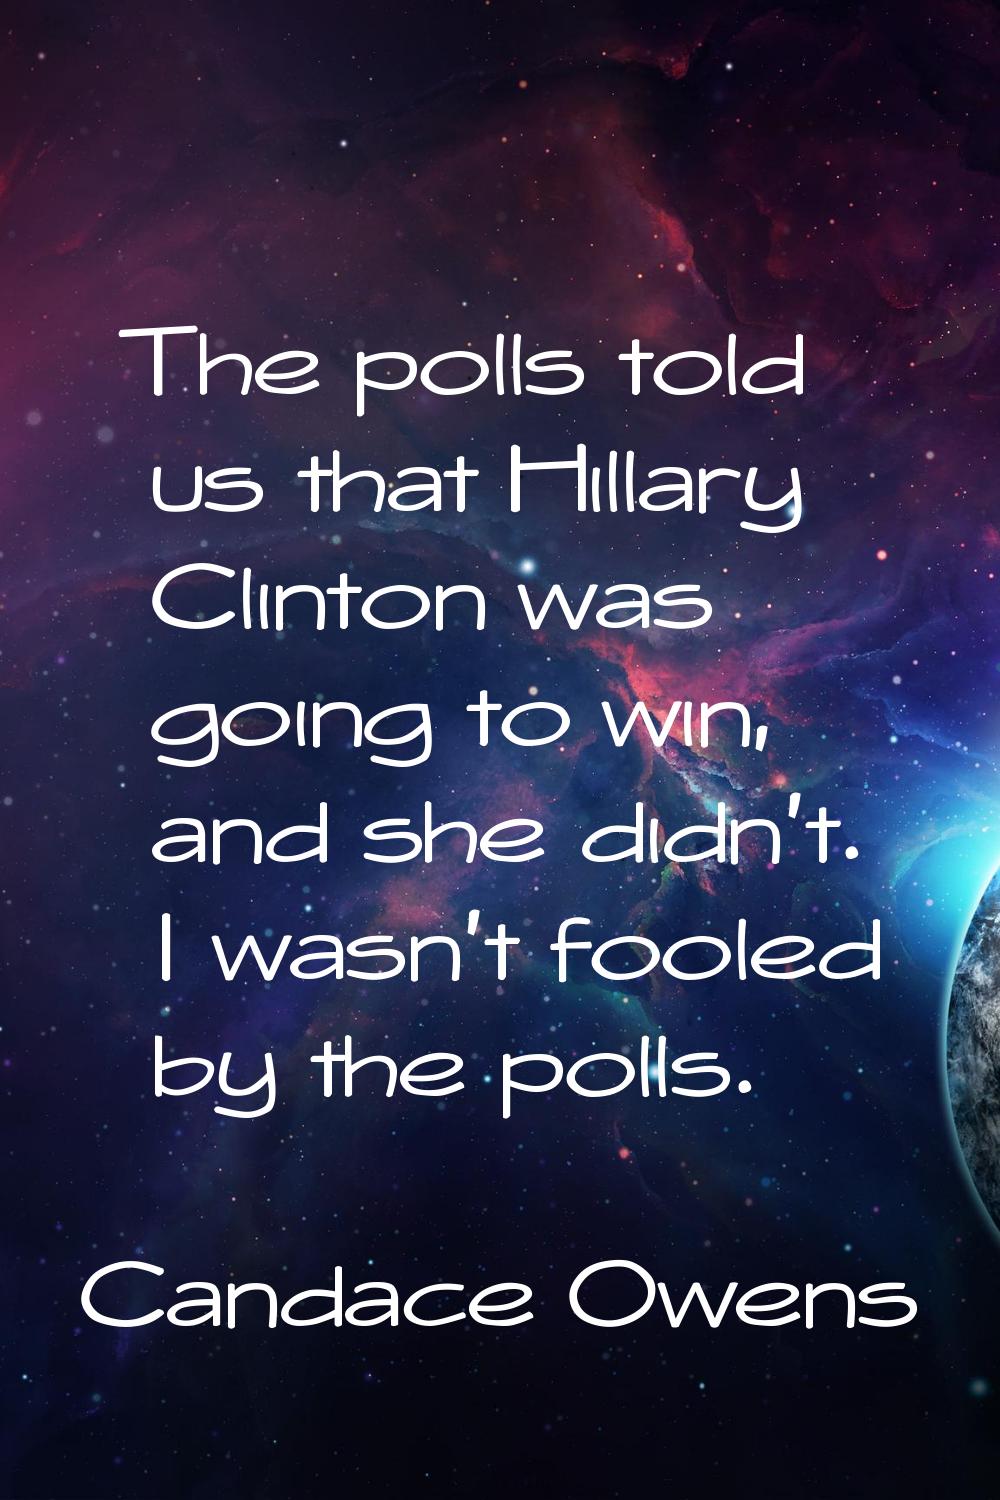 The polls told us that Hillary Clinton was going to win, and she didn't. I wasn't fooled by the pol